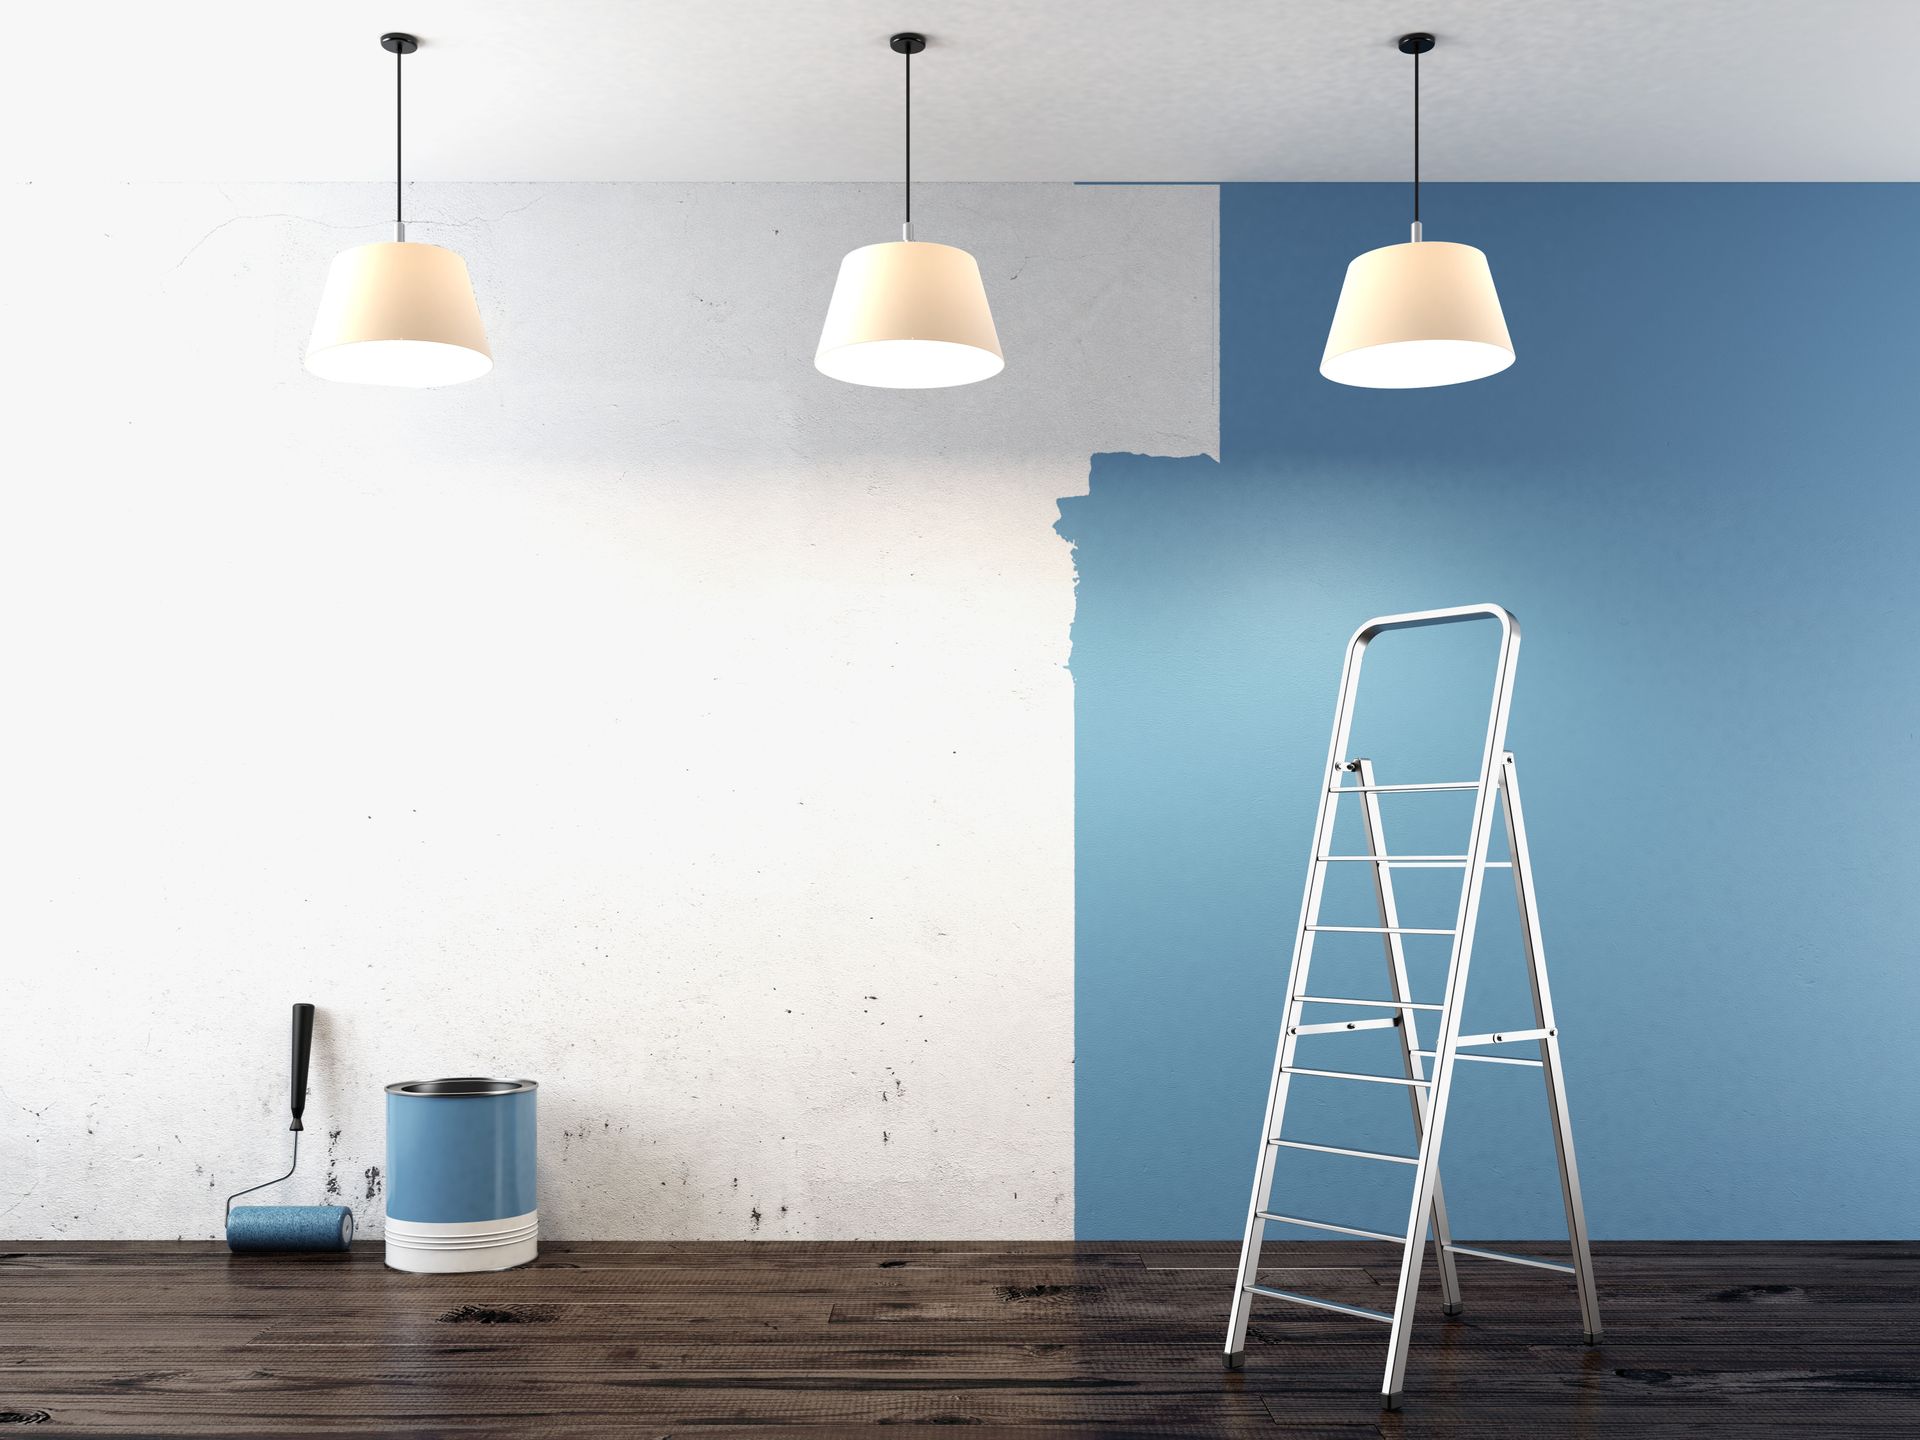 residential painting service